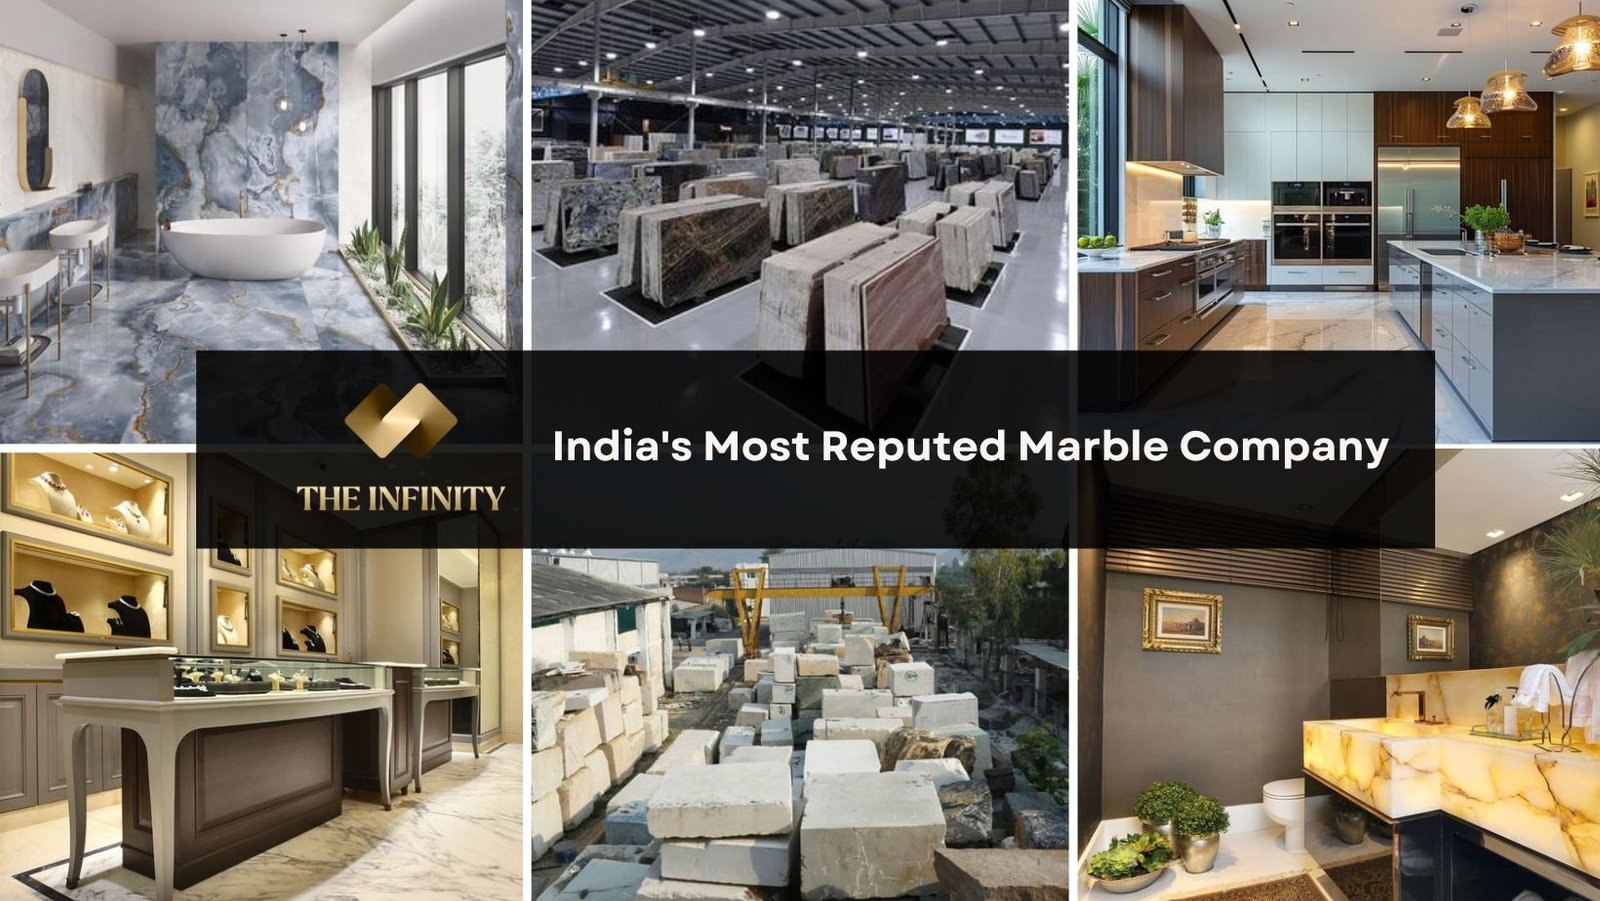 India's Most Reputed Marble Company